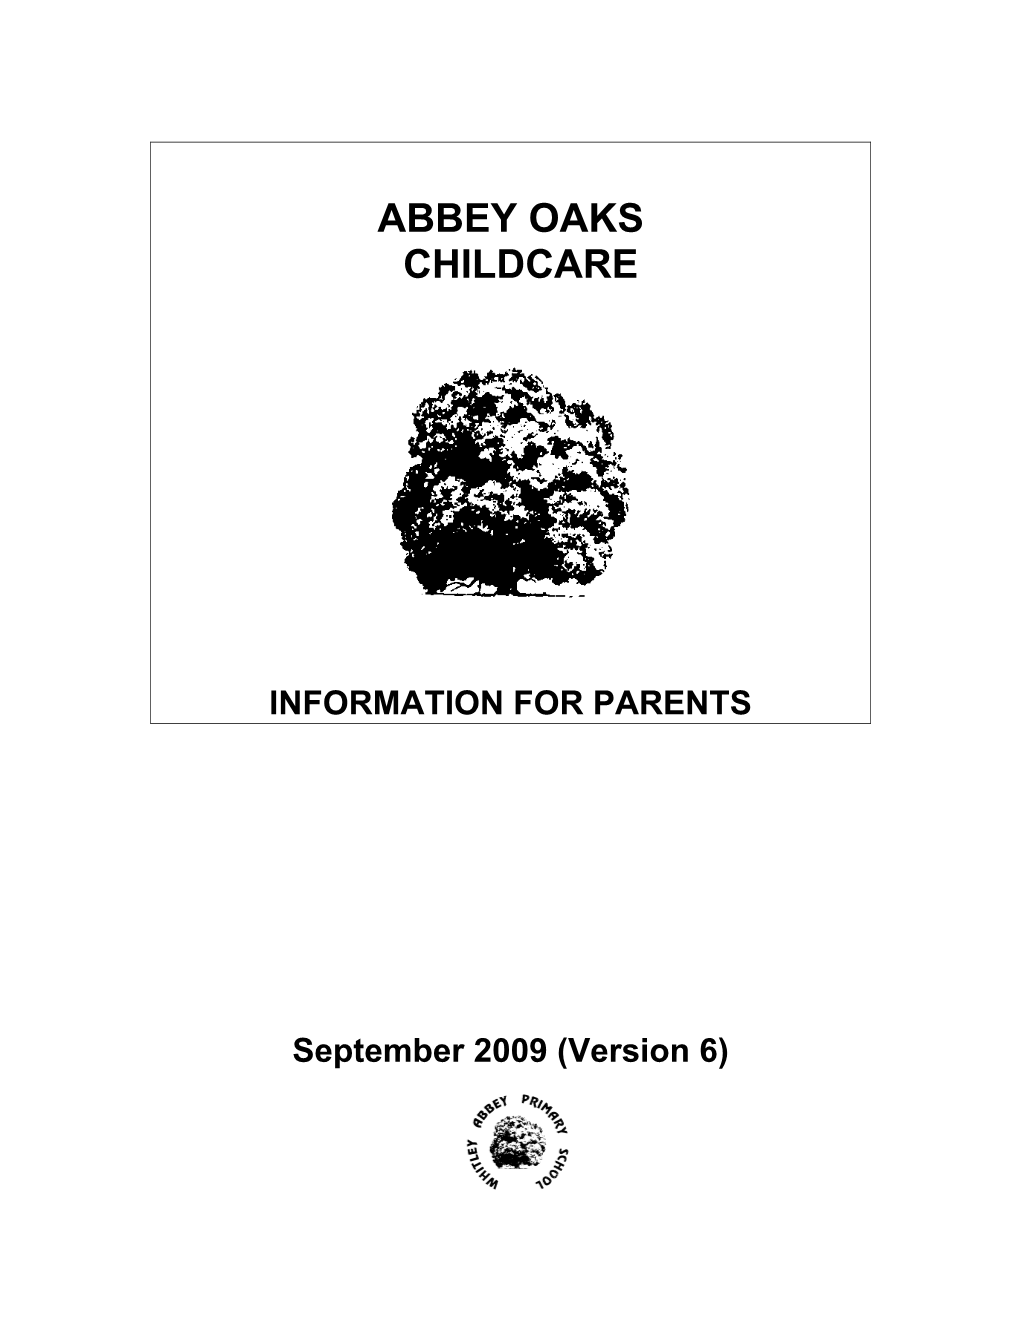 Abbey Oaks Childcare at Whitley Abbey Primary School